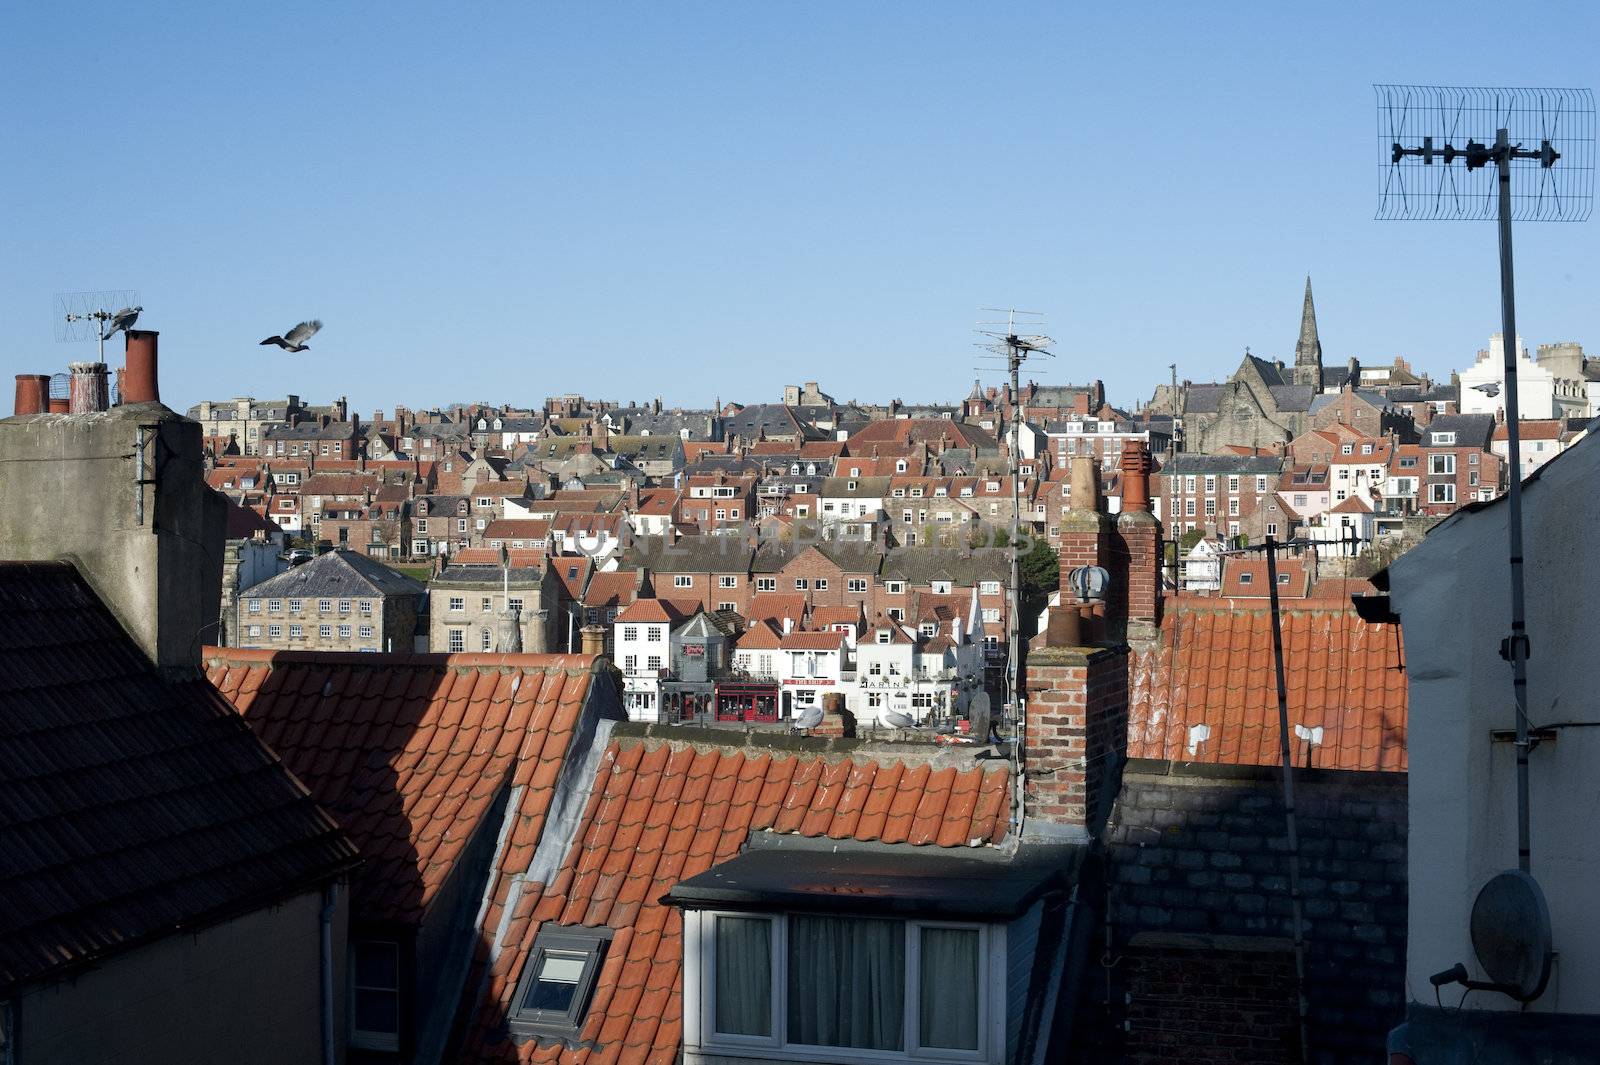 View over rooftops of a town by stockarch